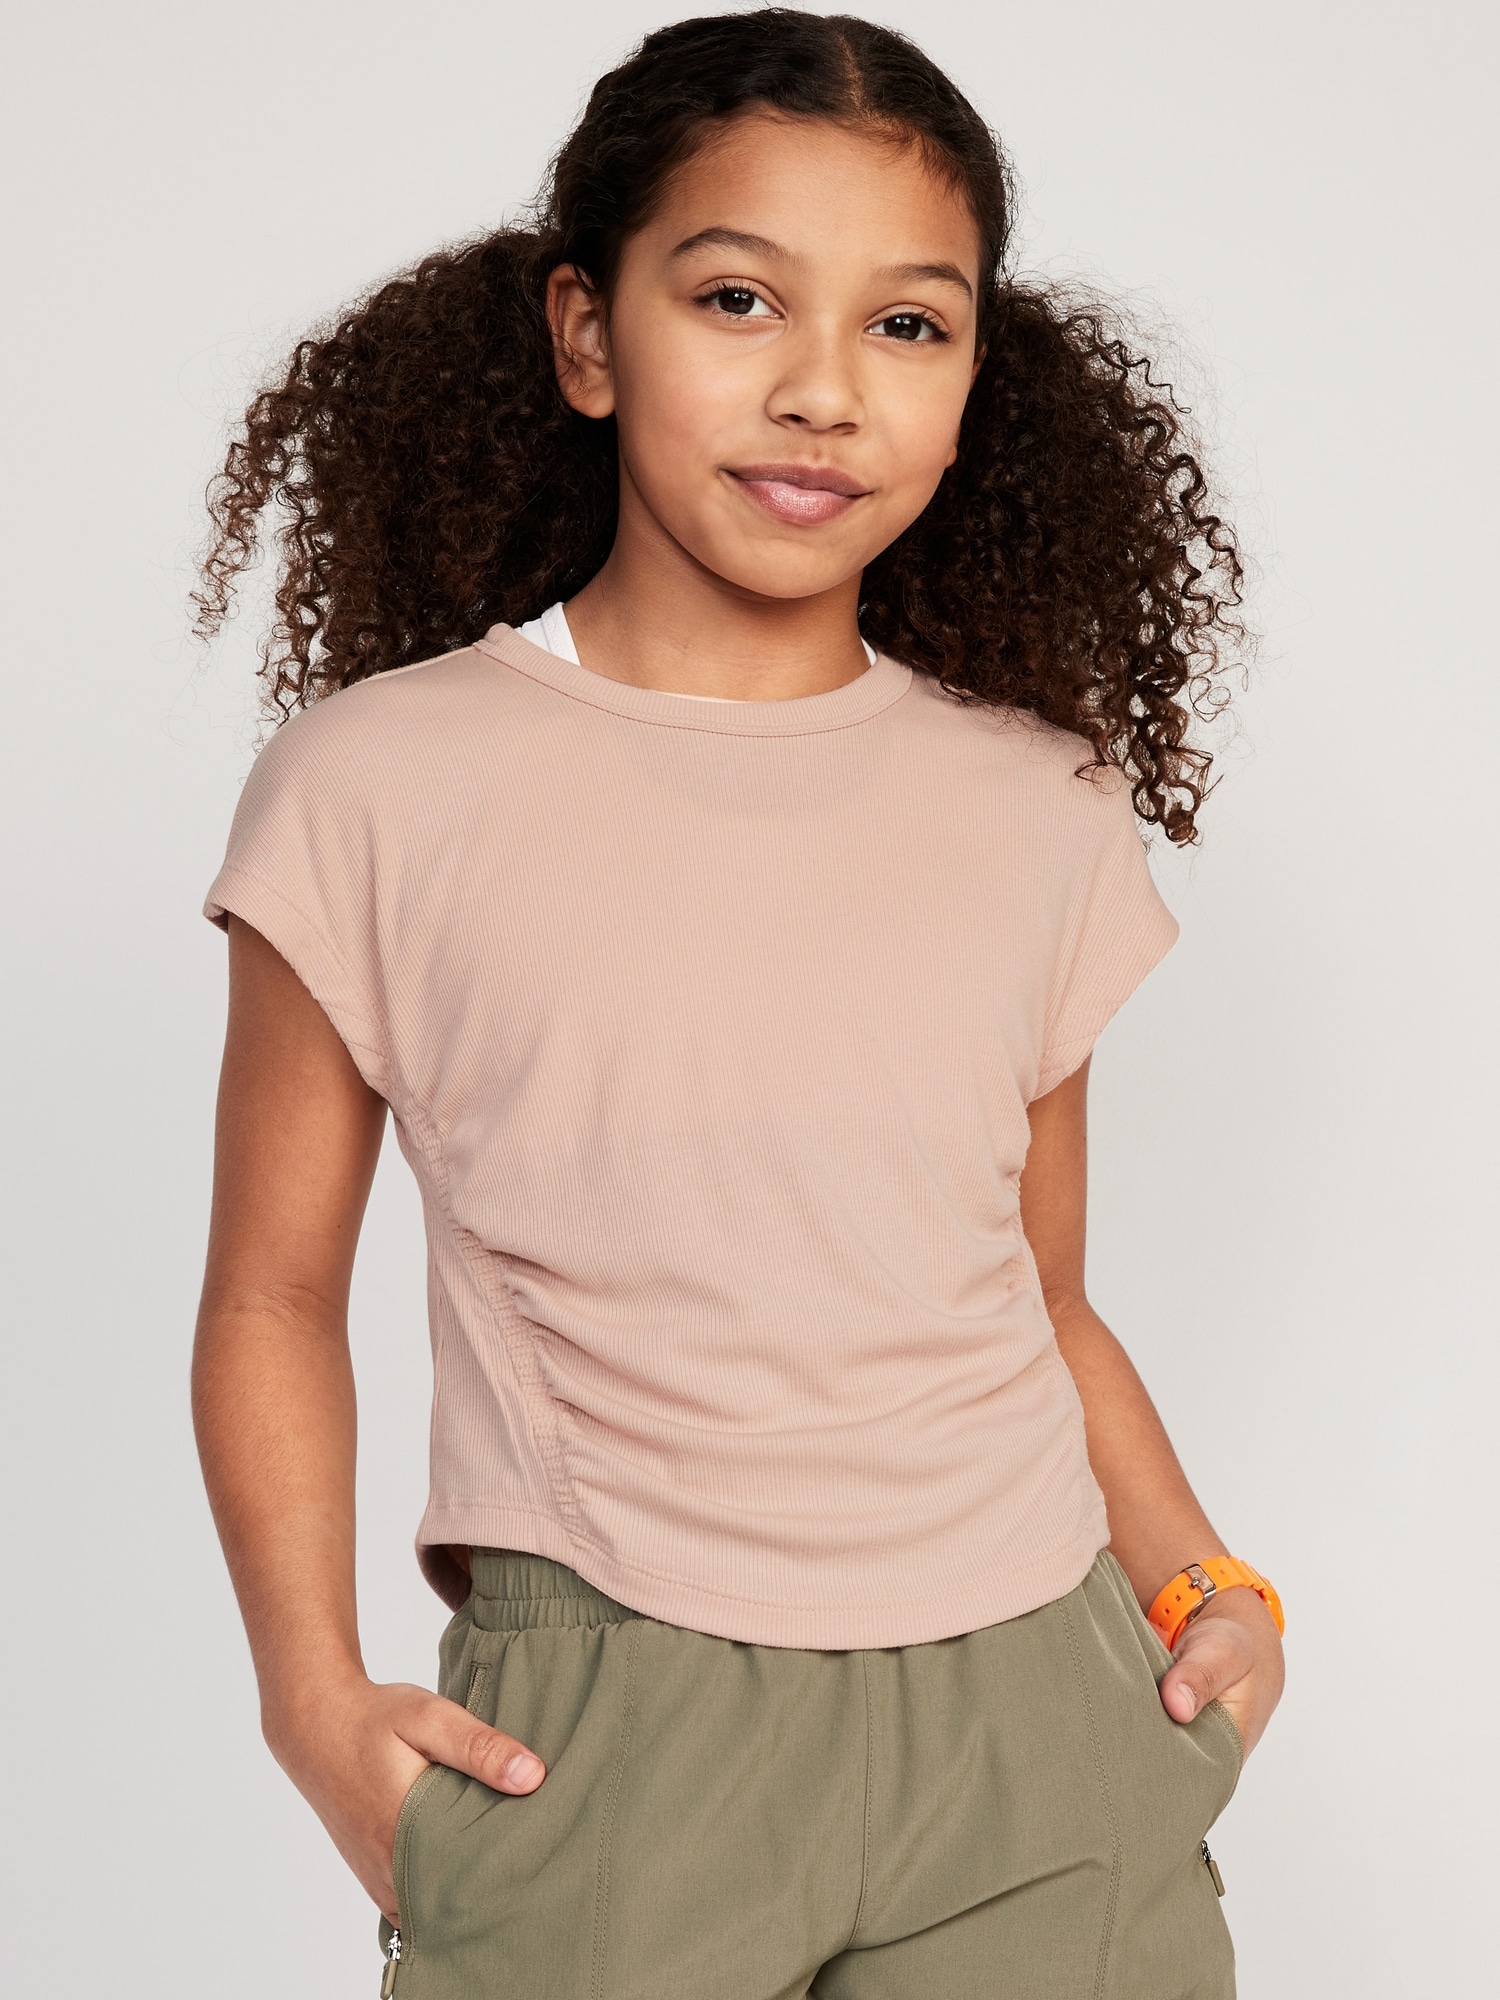 Old Navy UltraLite Short-Sleeve Rib-Knit Side-Ruched T-Shirt for Girls pink. 1